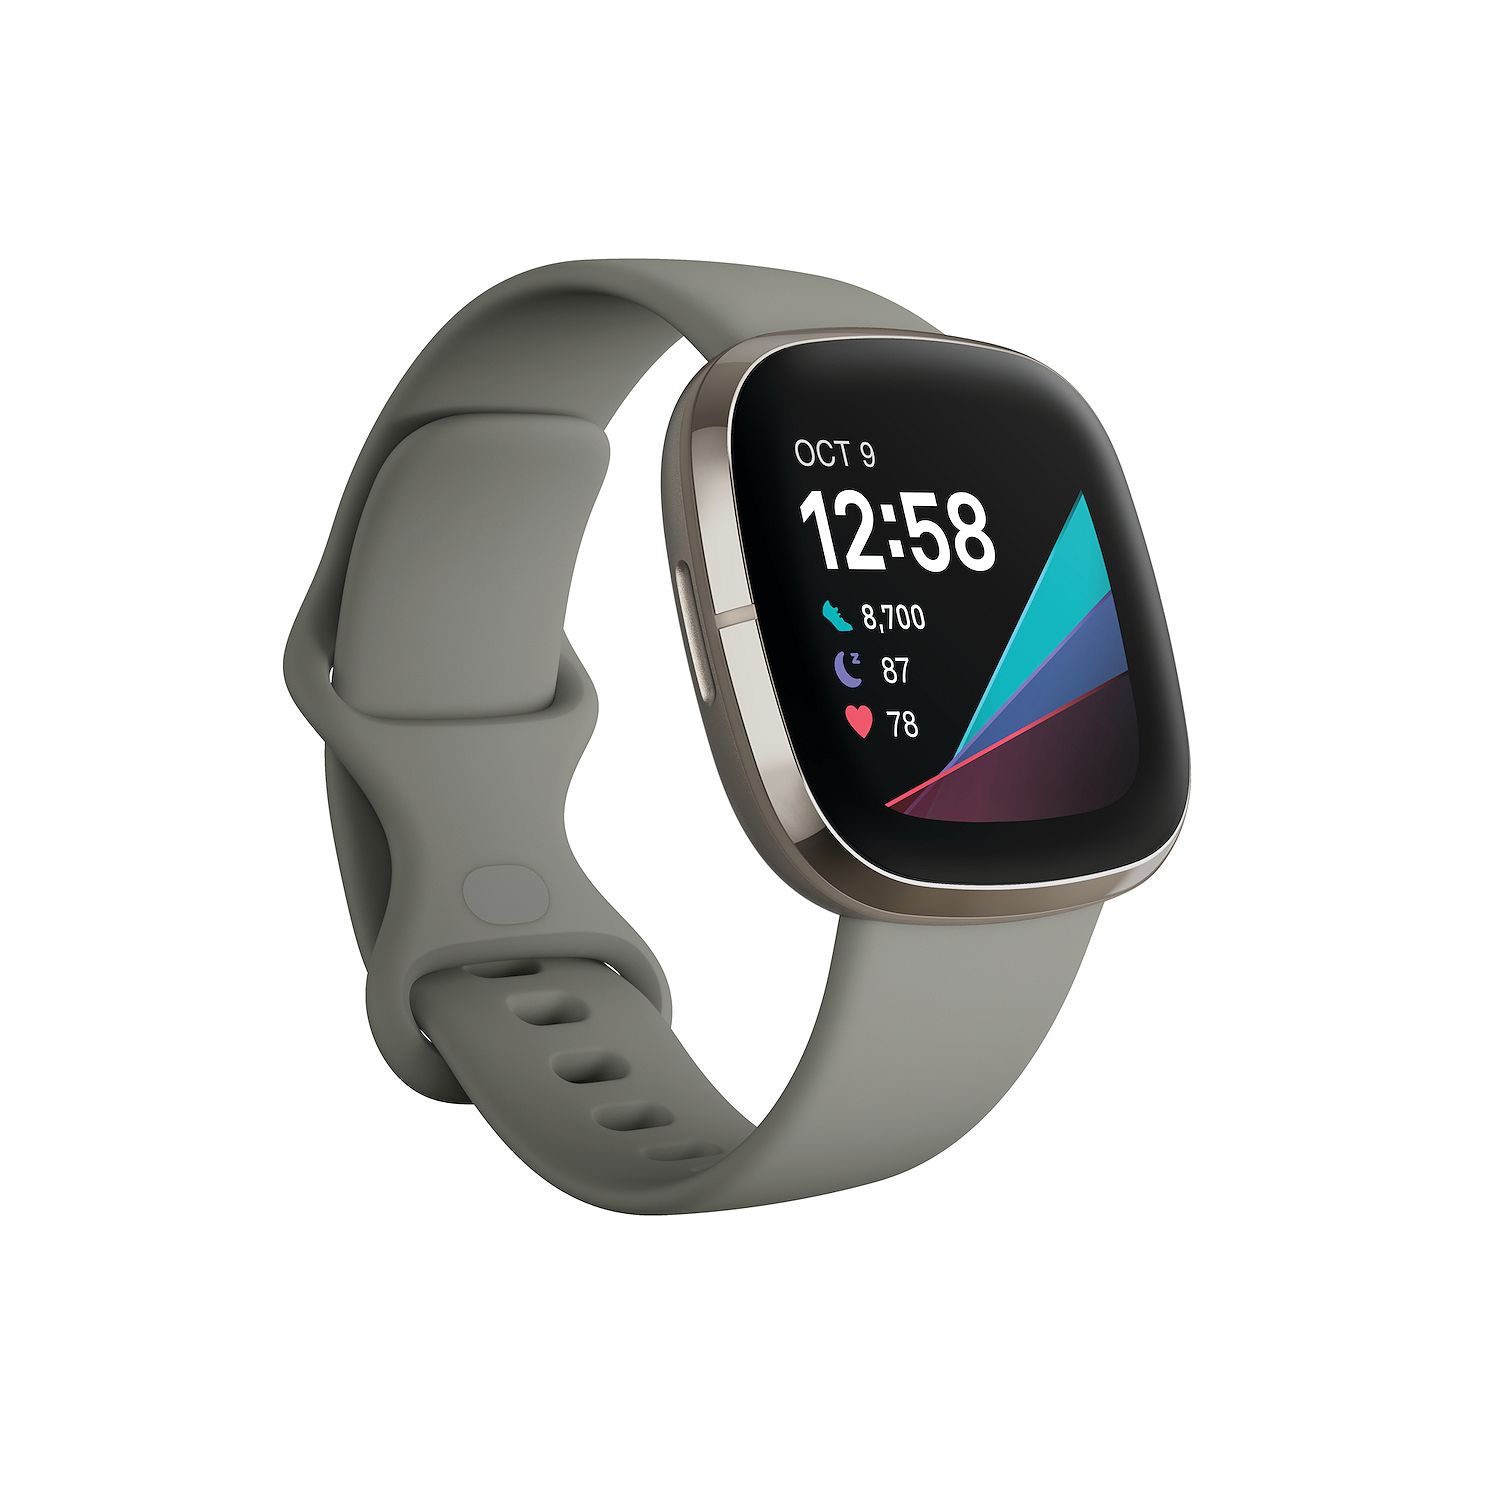 Kohls.com Fitbit Sense on Clearance for $74.99 plus tax with free shipping after add'l 50% off clearance price - Must add to cart to see price